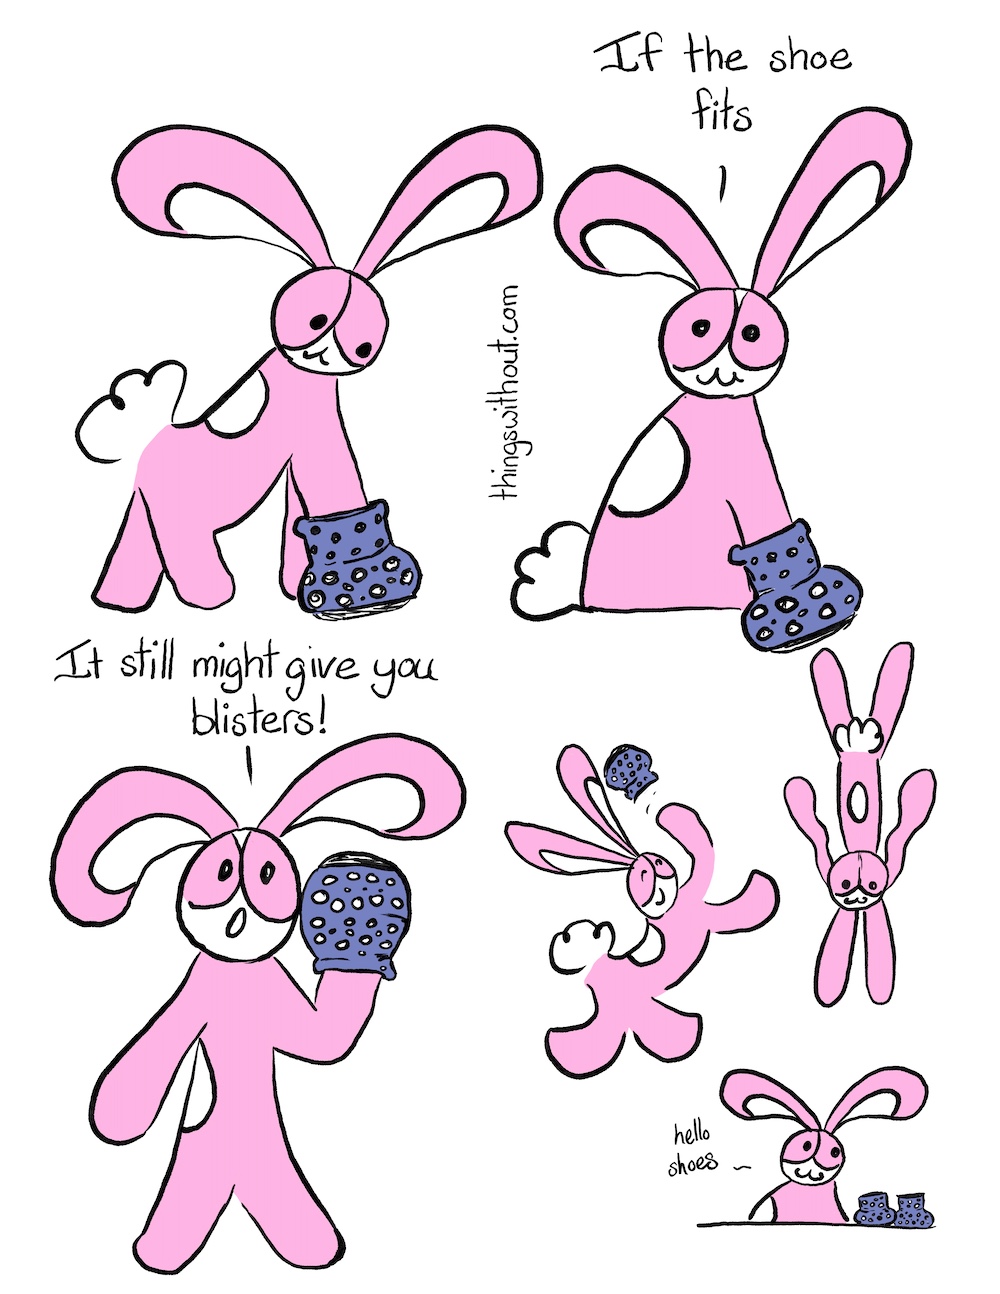 If the Shoe Fits Comic Transcript Bunson Hoppydew (a pink little boy bunny who likes dancing, friendship and cake) has put one of his front paws in a blue shoe with spots. He is smiling at the shoe. Bunson: If the shoe fits. Bunson is standing up and holding the shoe in the air. Bunson: It still might give you blisters! Bunson is frolicing and dancing around, he has flung the shoe off his paw as he zooms through the air. Bunson is sitting down with a pair of shoes next to him. He is smiling. Bunson: Hello shoes